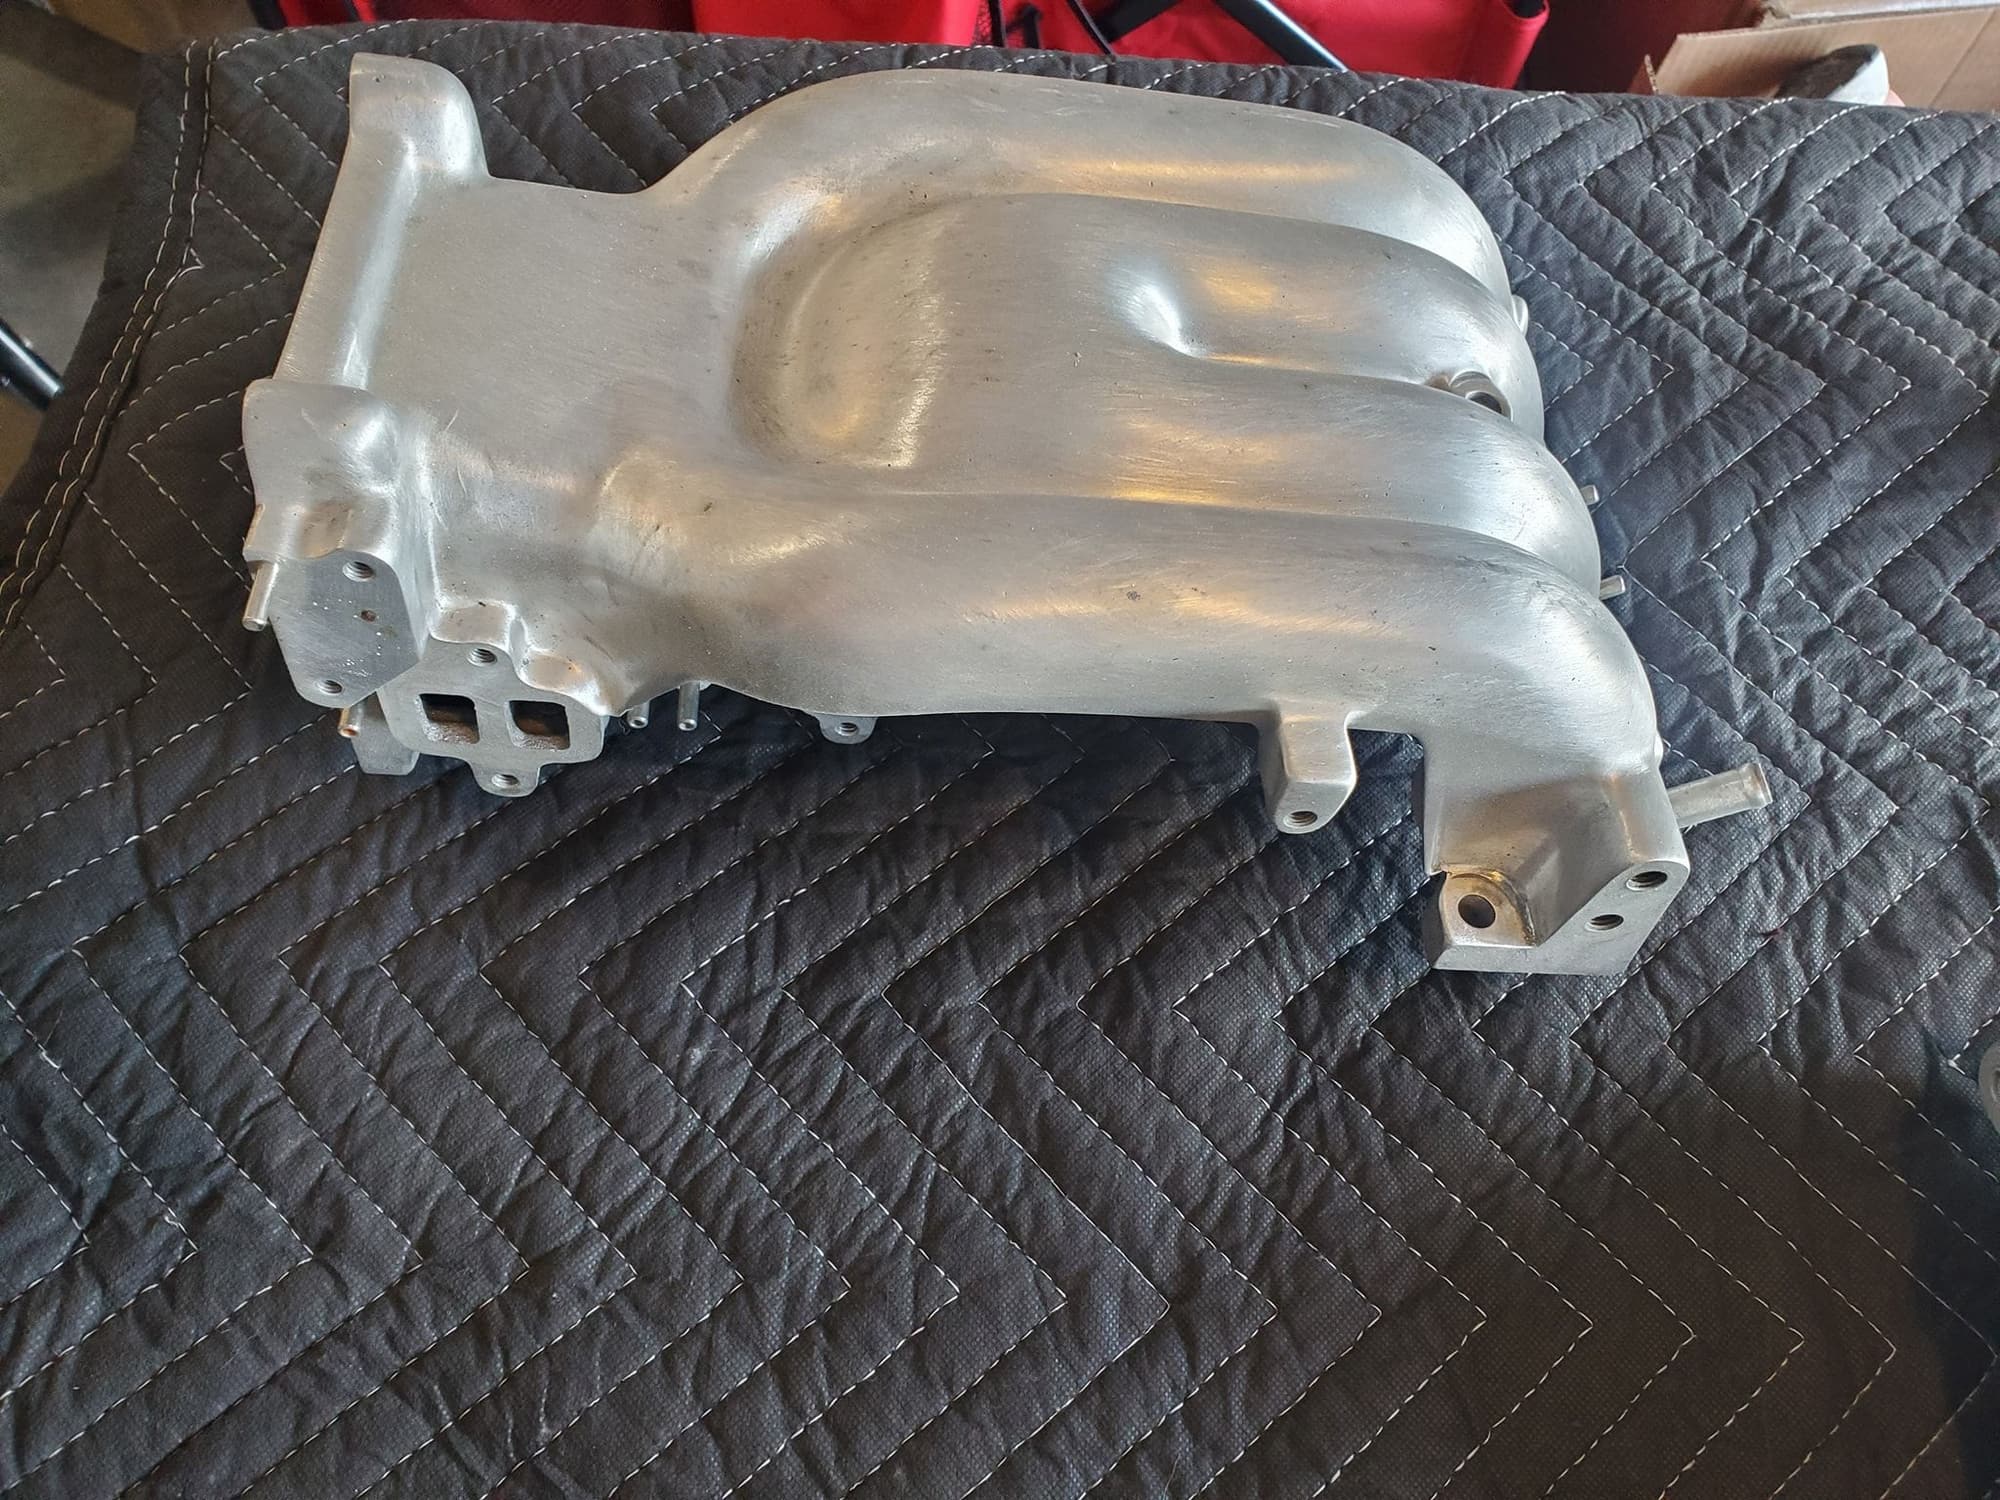 Accessories - Multiple hard to get stuff for sale. either new or used - New - 1993 to 1995 Mazda RX-7 - Desert Hot Springs, CA 92240, United States